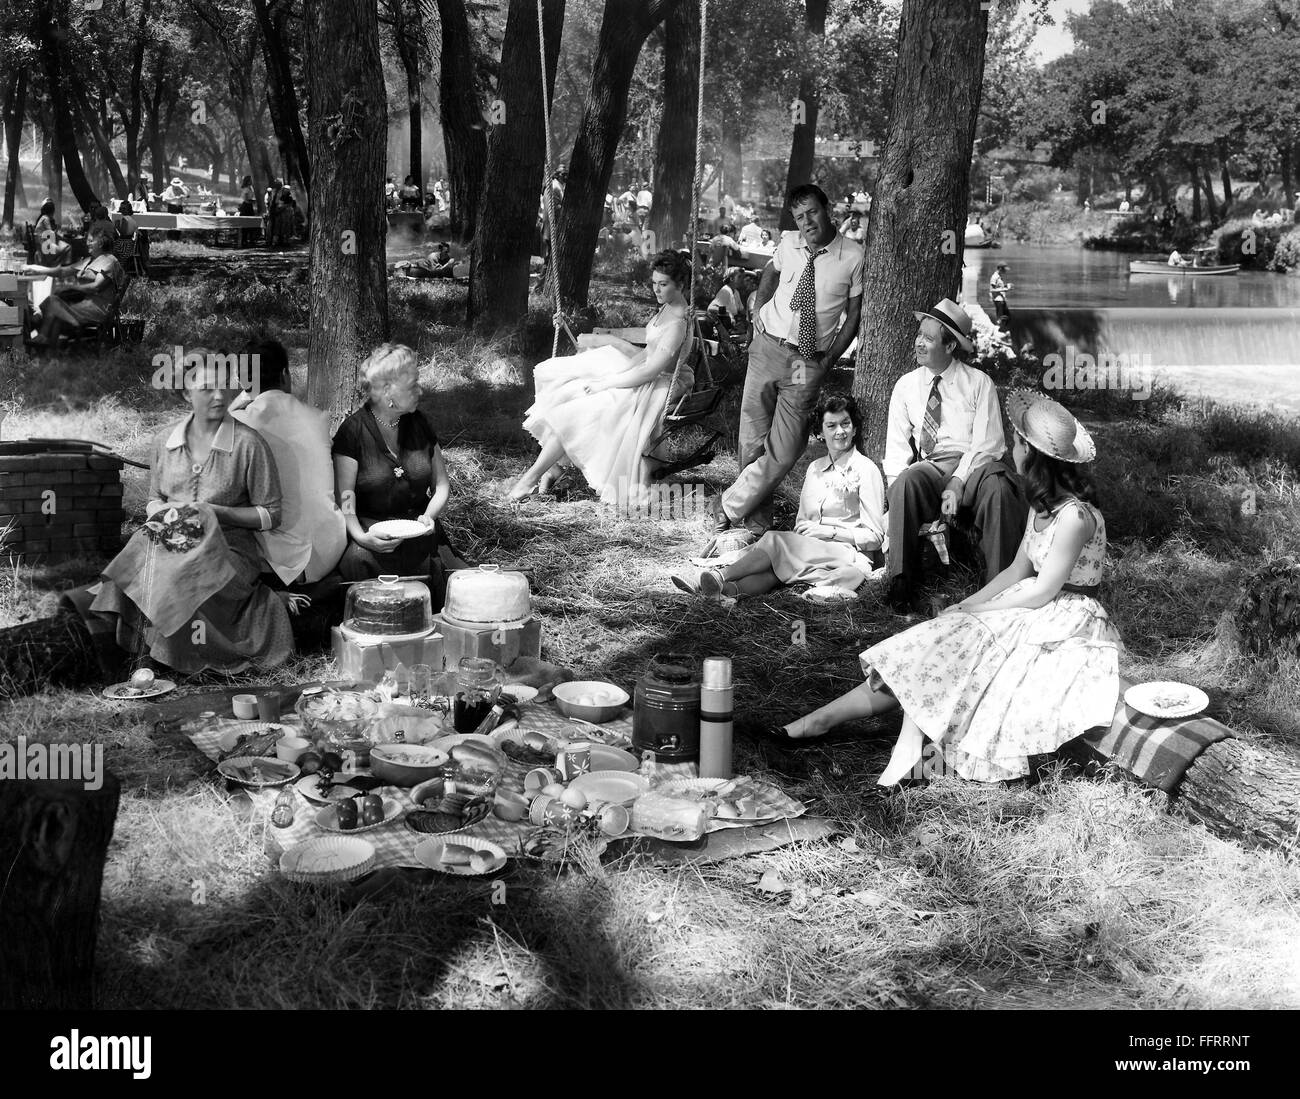 FILM: PICNIC, 1955. /nLabor Day picnic in a small town in Kansas. Scene from from the 1955 film version of Willima Inge's play 'Picnic' with Kim Novak, on swing, William Holden, standing, and Rosalind Russell, leaning against tree. Stock Photo